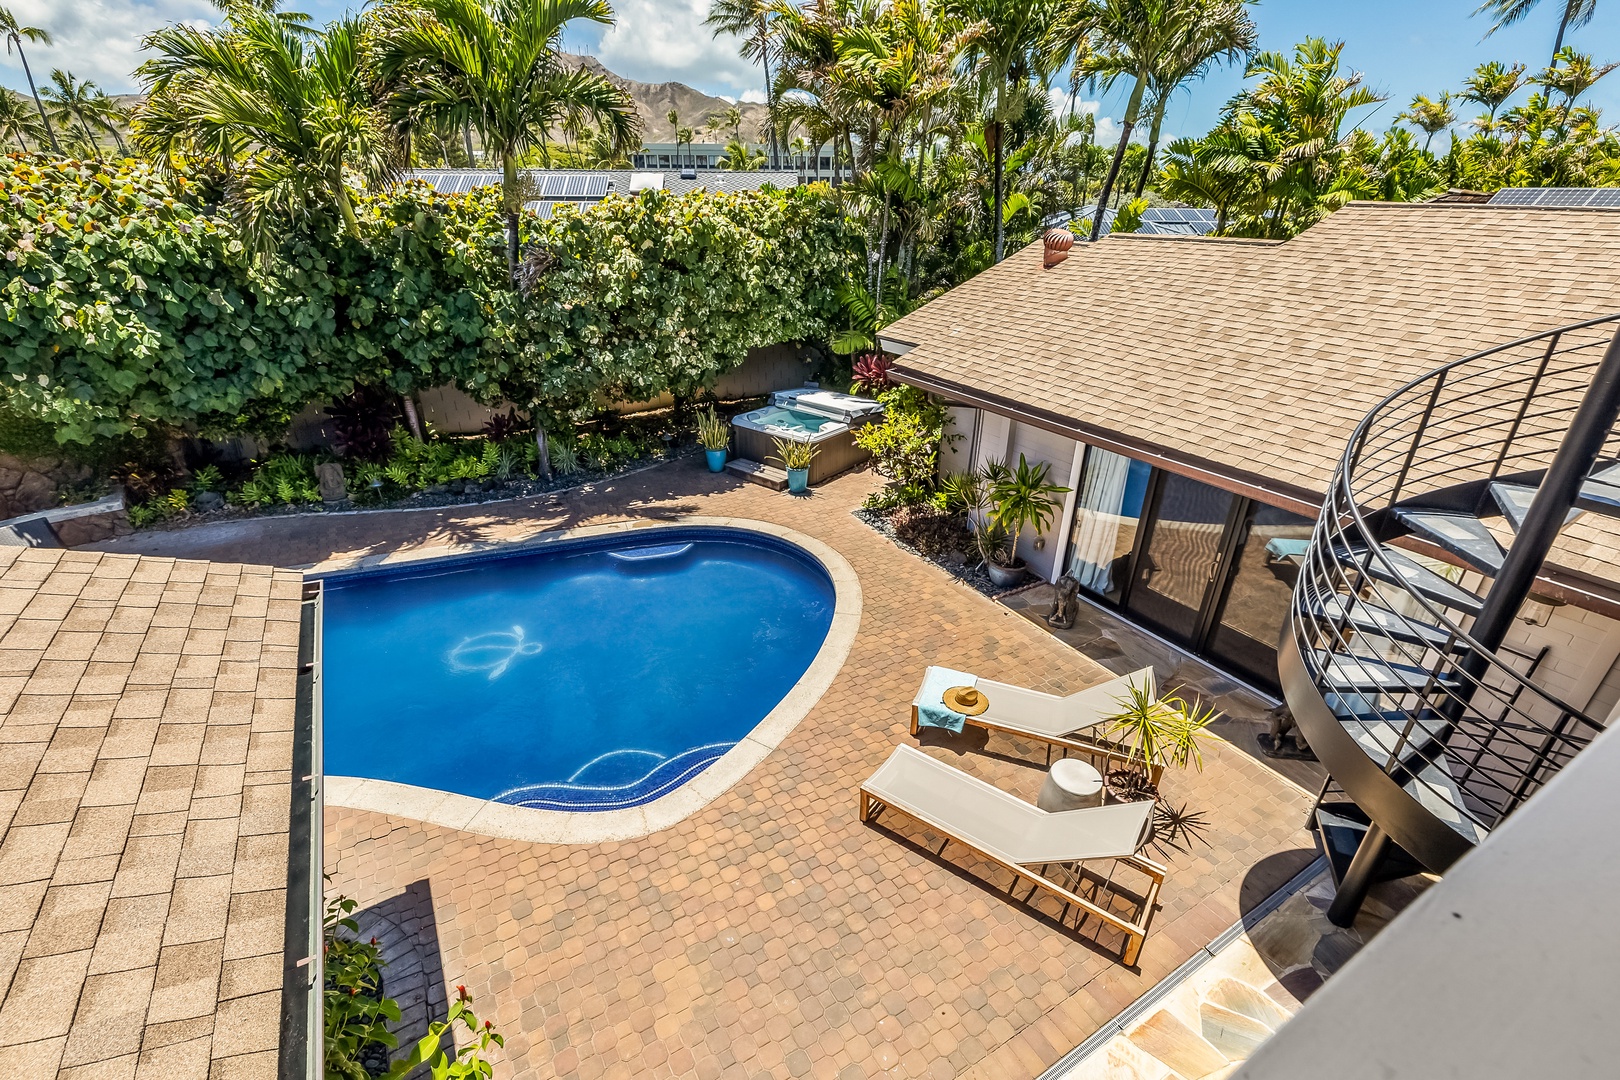 Kailua Vacation Rentals, Hale Ohana - View of the pool deck from the rooftop deck